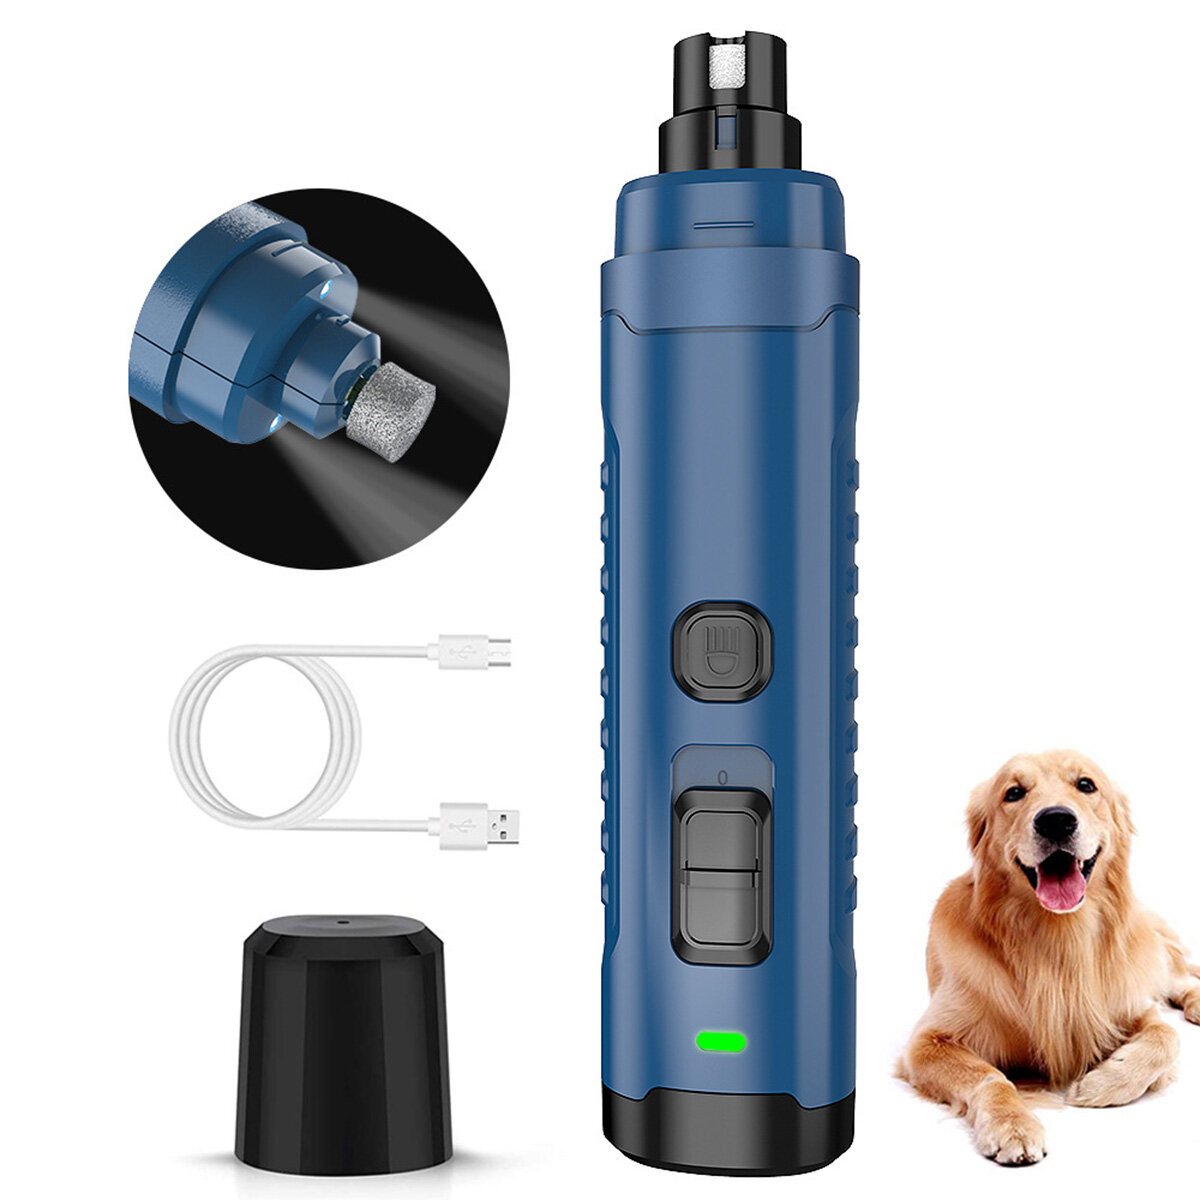 Portable 2 LED Light USB Rechargeable Electric Dog Nail Grinder Professional 2-Speed Grooming Trimmi